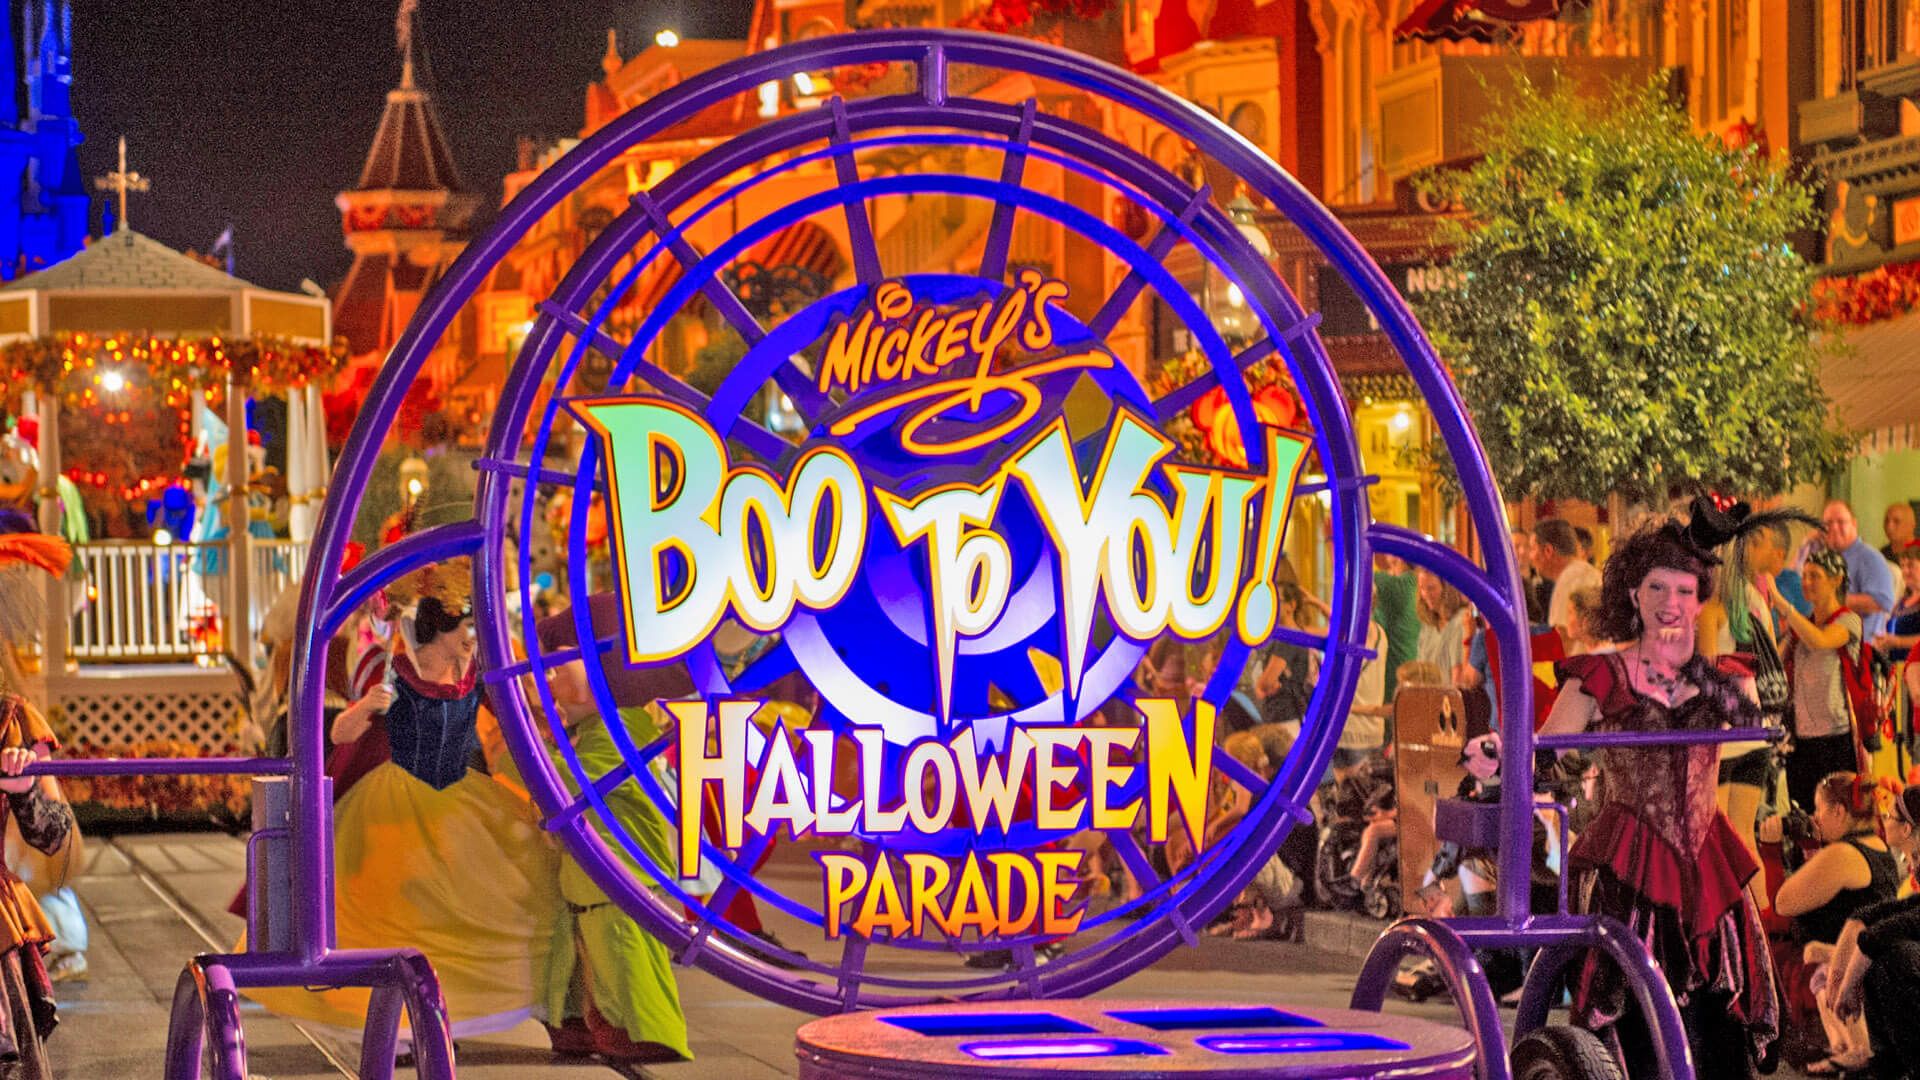 VIDEO: Frighteningly Fun Parade And Fireworks Shows Return To Mickey's Not So Scary Halloween Party 2018. Inside The Magic